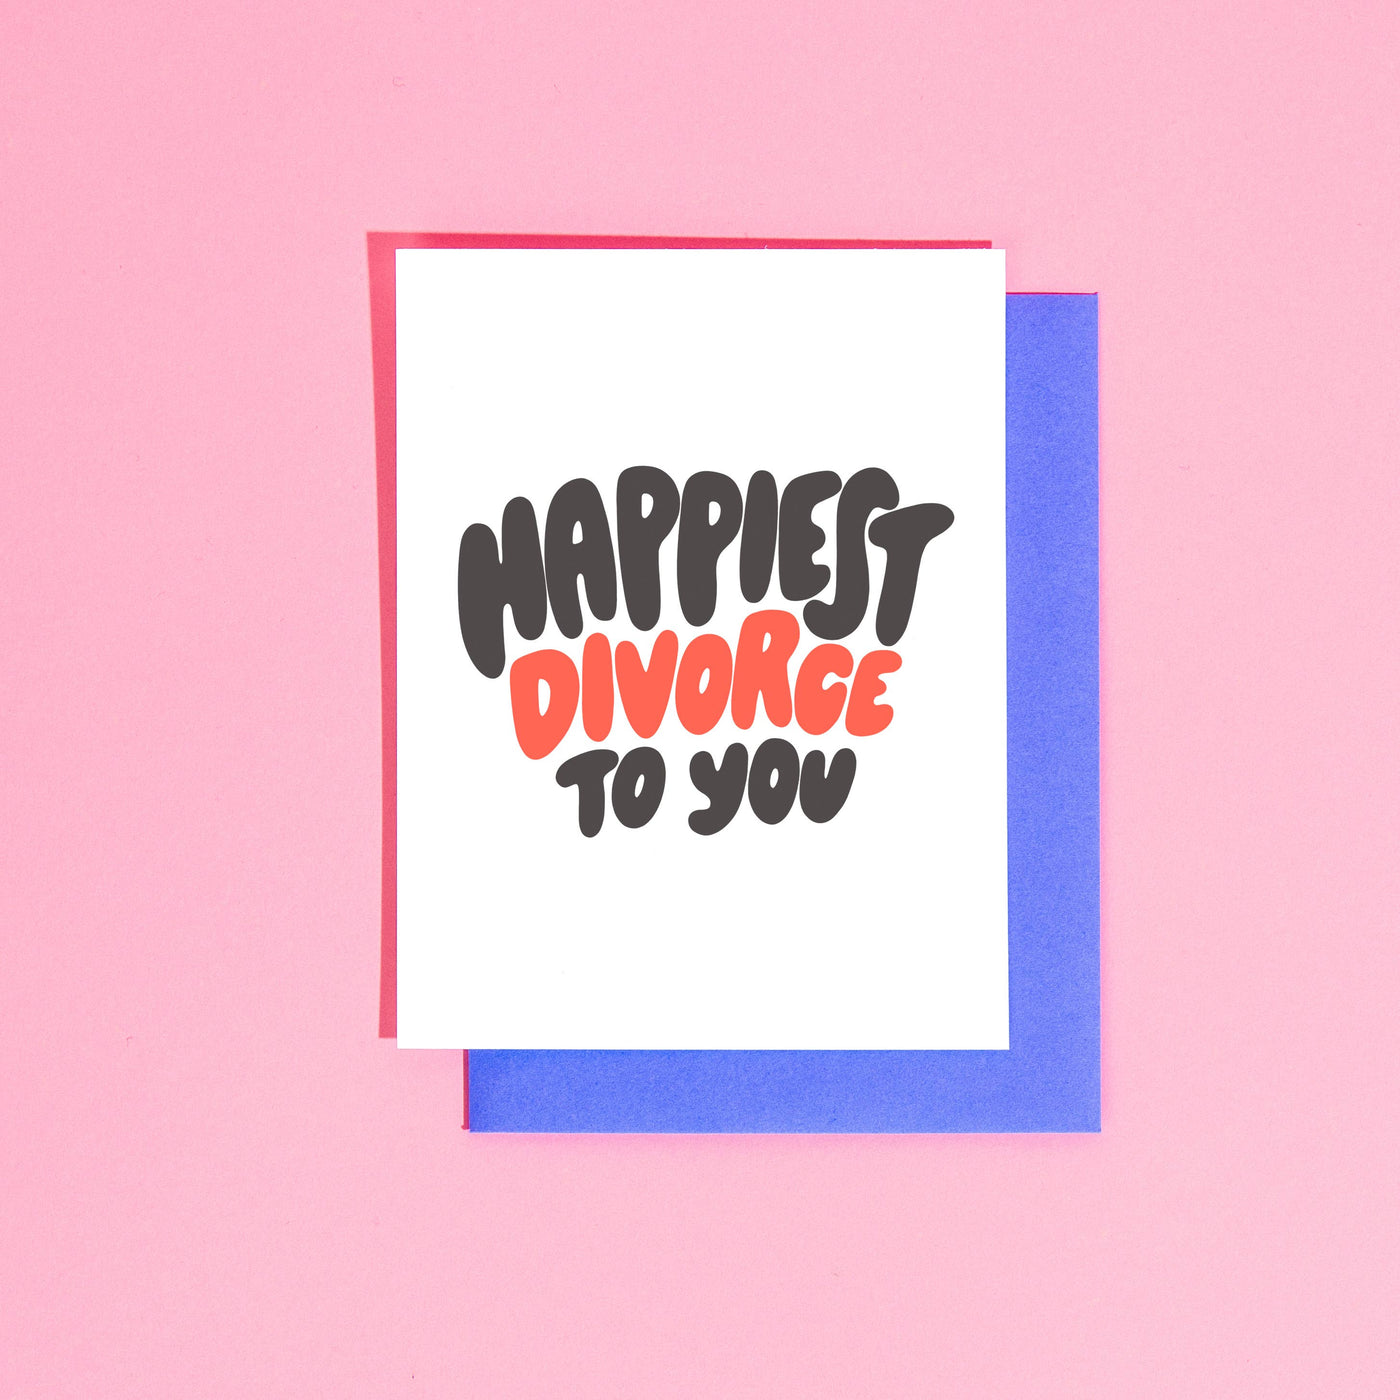 Happiest Divorce to You Greeting Card